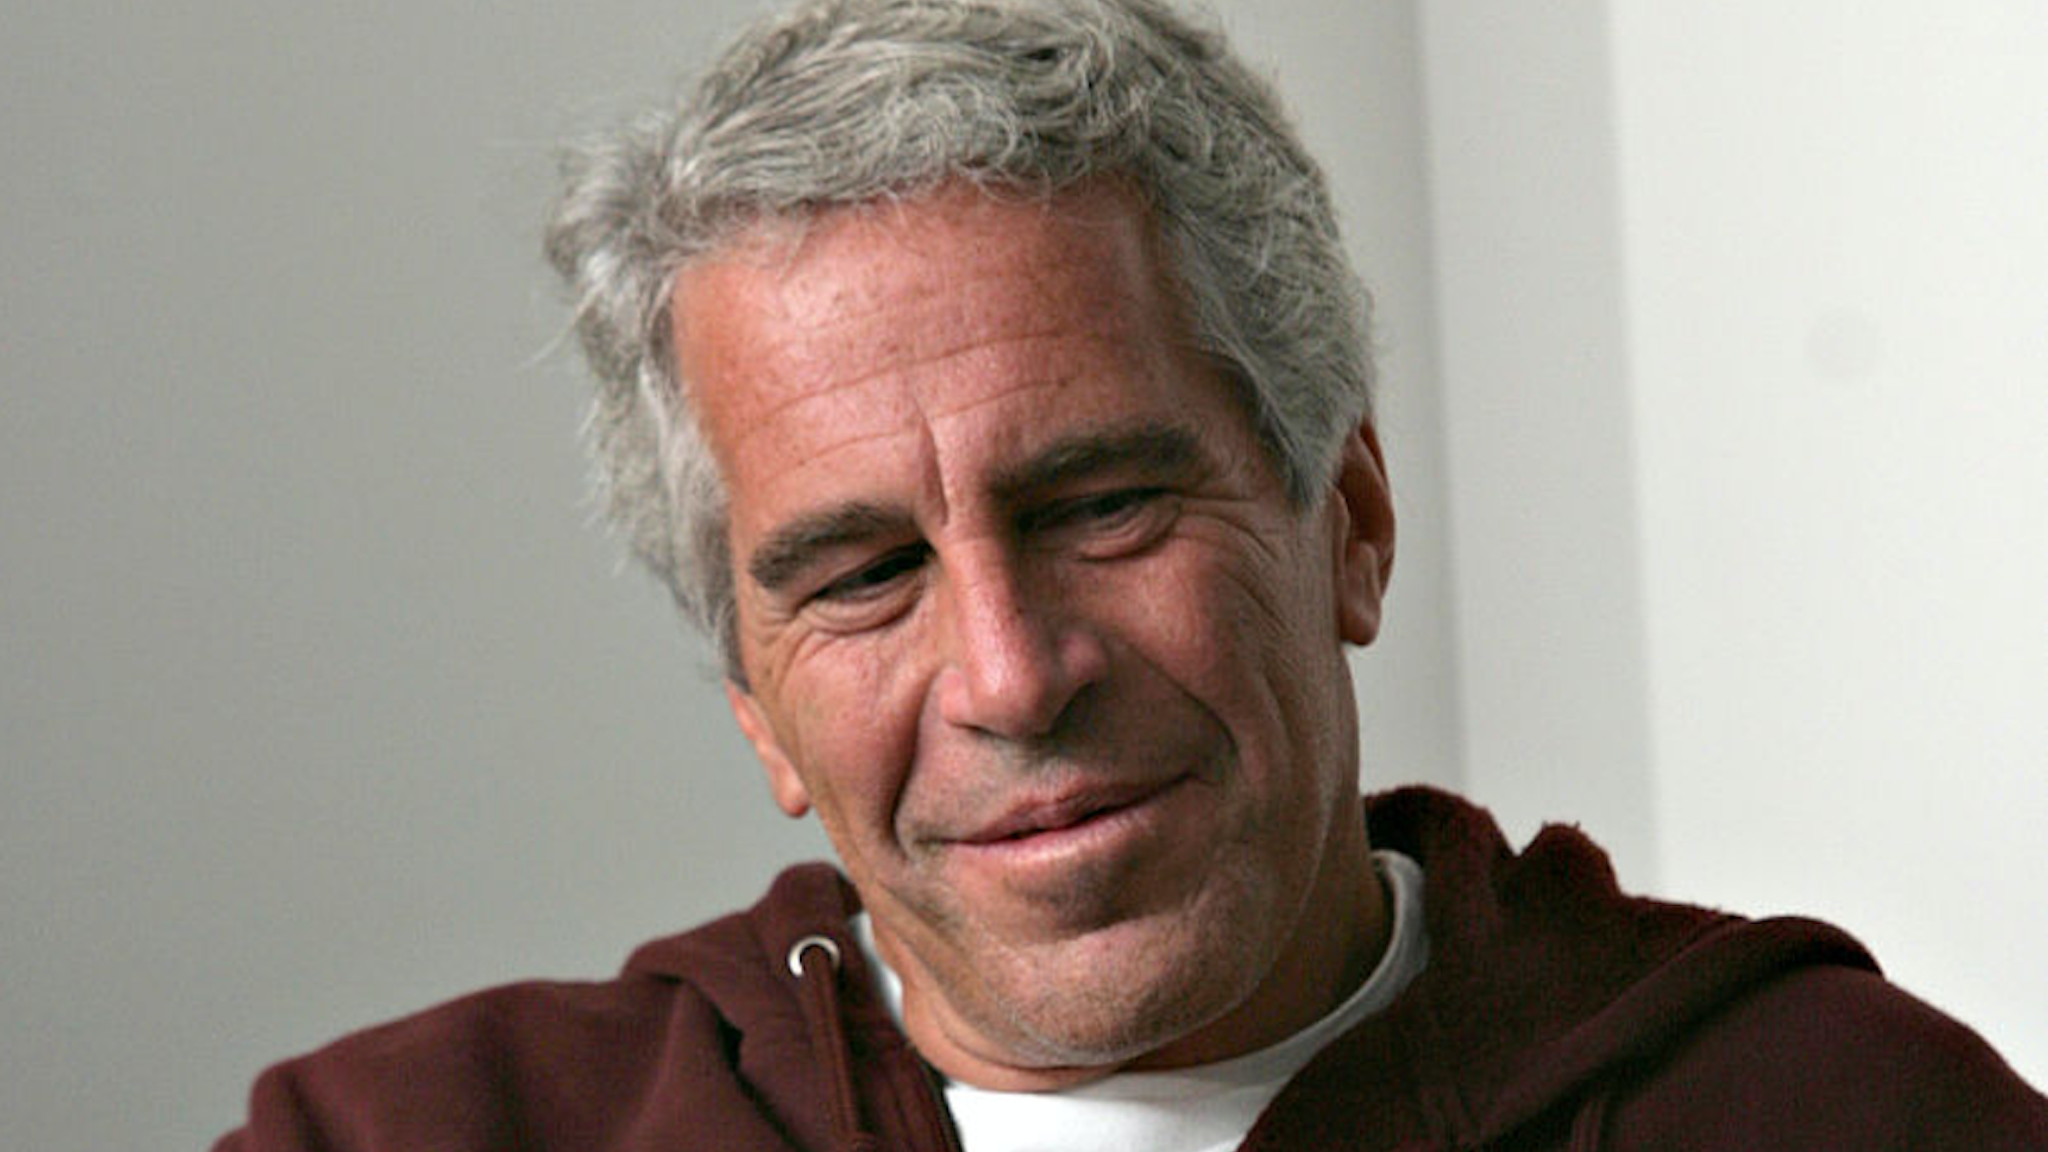 Billionaire Jeffrey Epstein in Cambridge, MA on 9/8/04. Epstein is connected with several prominent people including politicians, actors and academics. Epstein was convicted of having sex with an underaged woman.